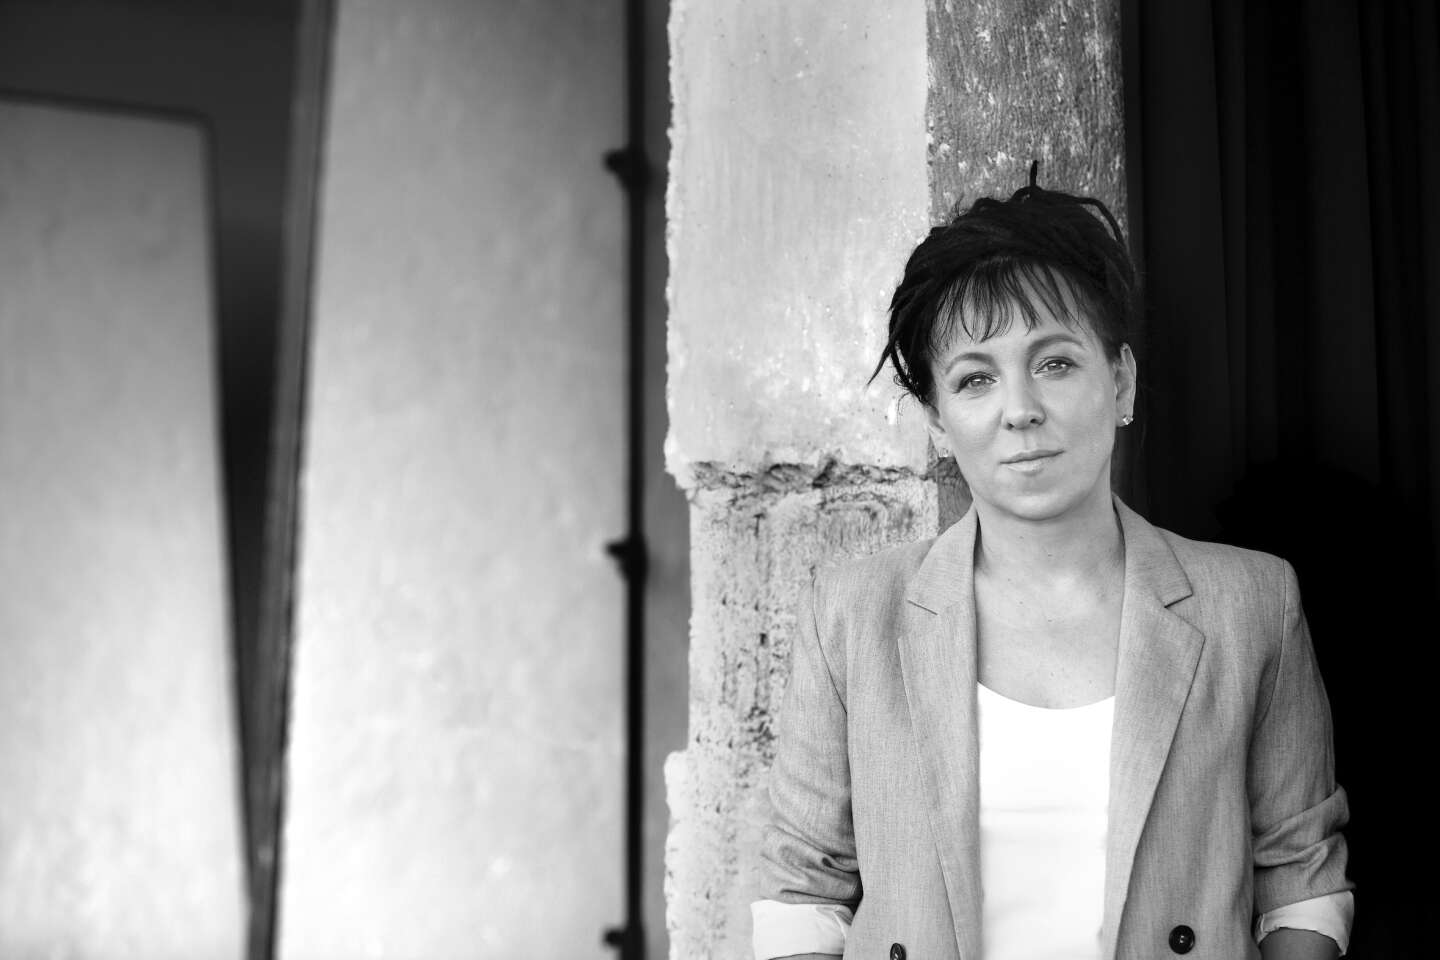 “Game on drums and tambourines”: the moving universe of Olga Tokarczuk